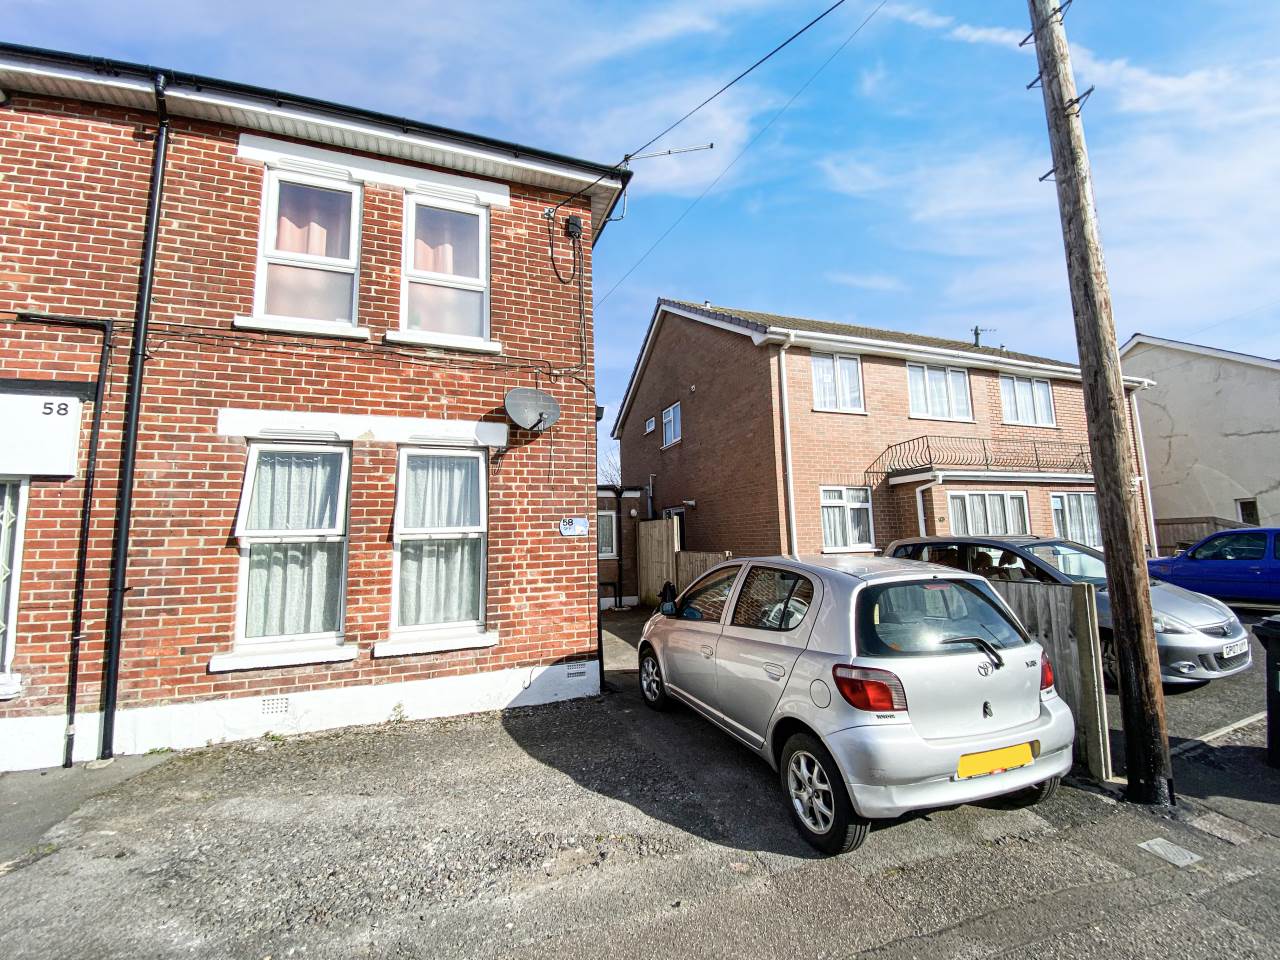 GUIDE £100,000 to £110,000 * GROUND FLOOR * ONE BEDROOM * KITCHEN * SHOWER ROOM * OFF ROAD PARKING & OUTSIDE SPACE * LONG LEASE * CLOSE TO SHOPS & BUS ROUTES * NO CHAIN *